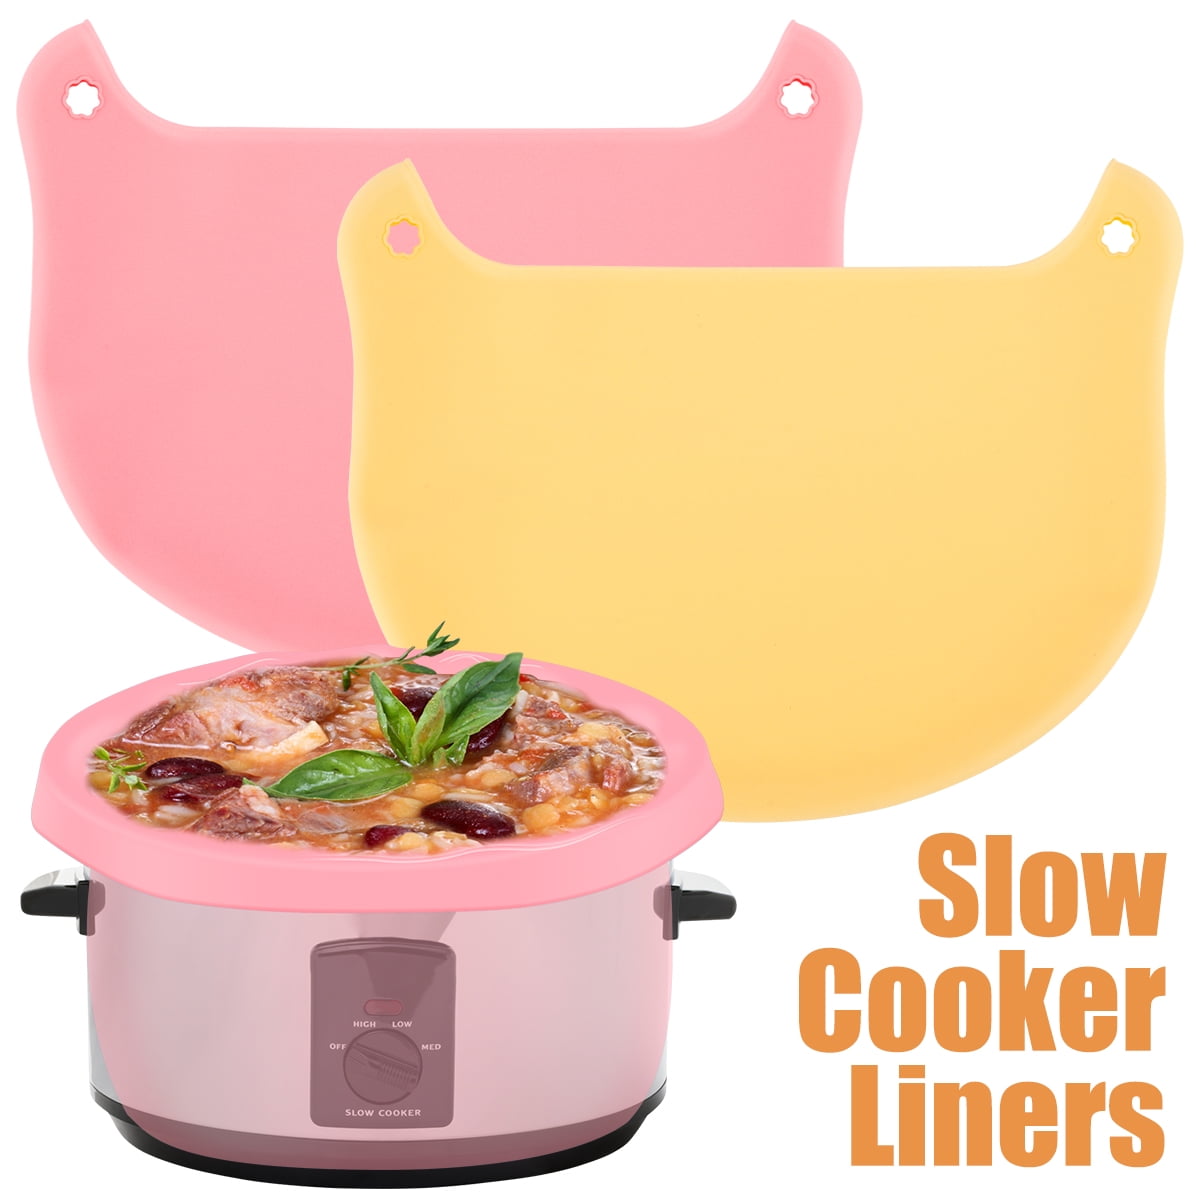 New England Stories PotDivider Silicone Slow Cooker Liners Insert Fit for 8 qt Oval Crockpot Reusable Two-in-One Slow Cooker Divider - Leakproof